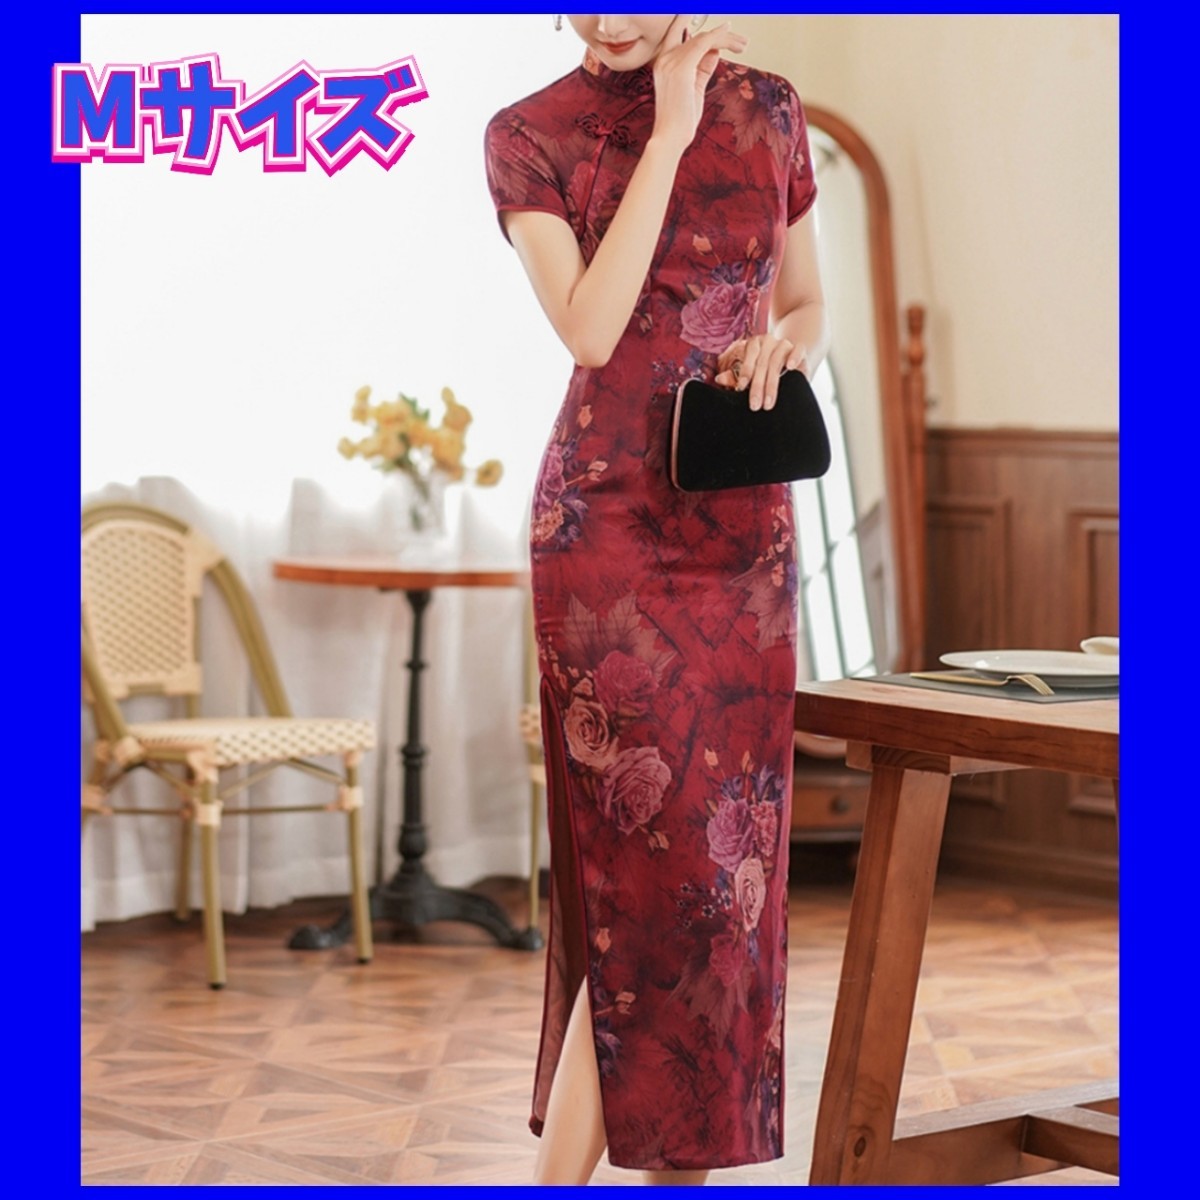  China dress tea ina clothes M size sexy cosplay night dress costume play clothes 